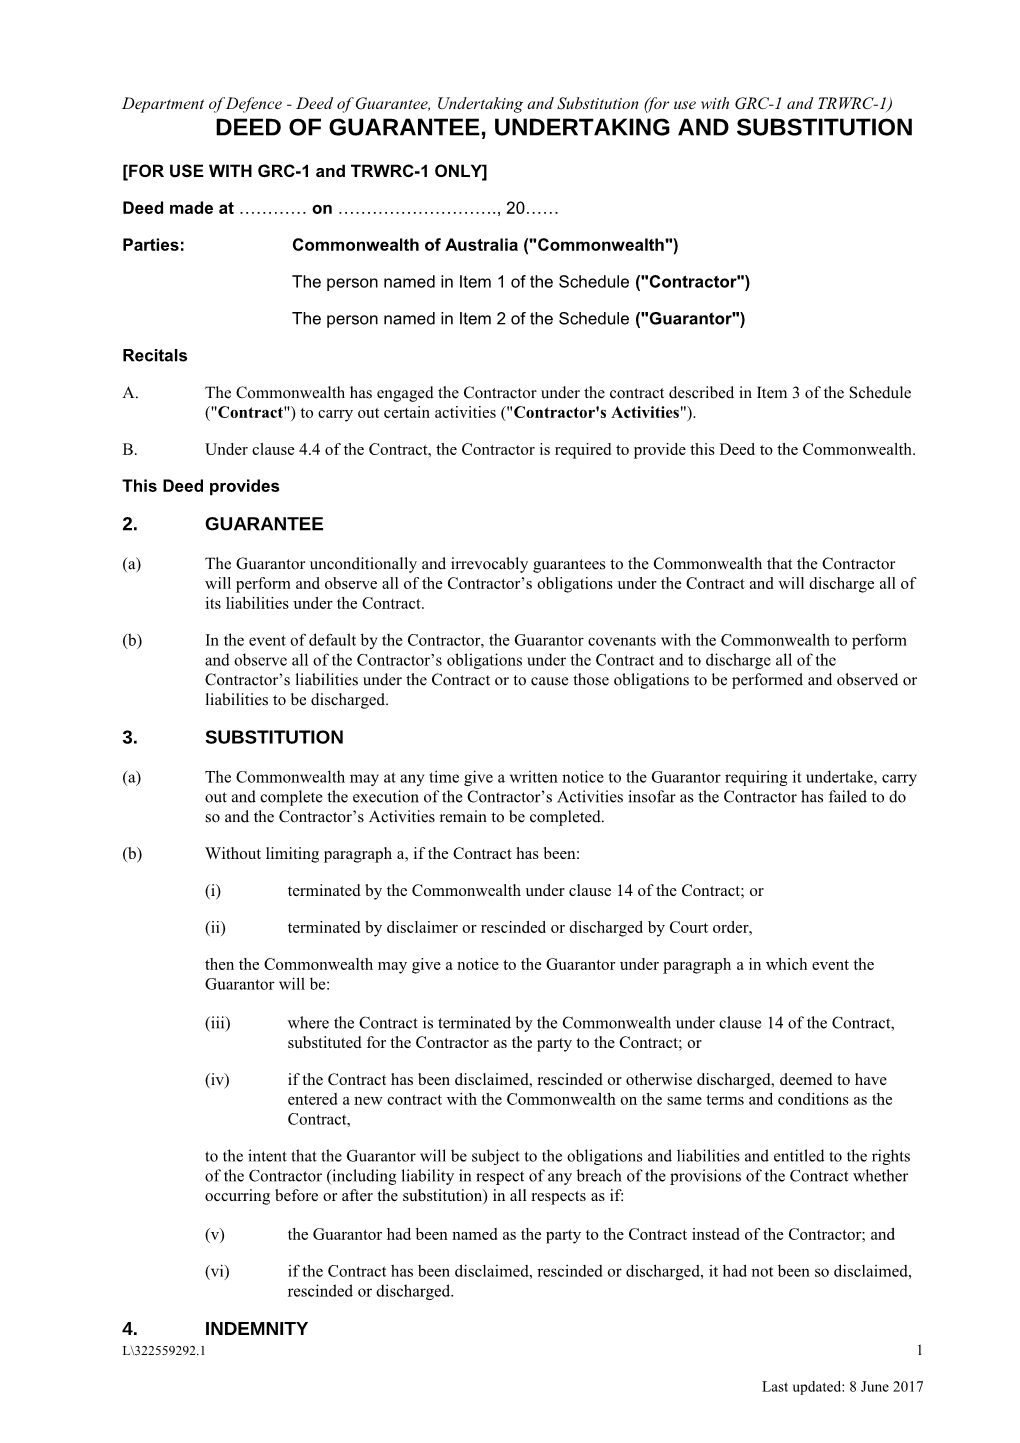 Deed of Guarantee, Undertaking and Substitution